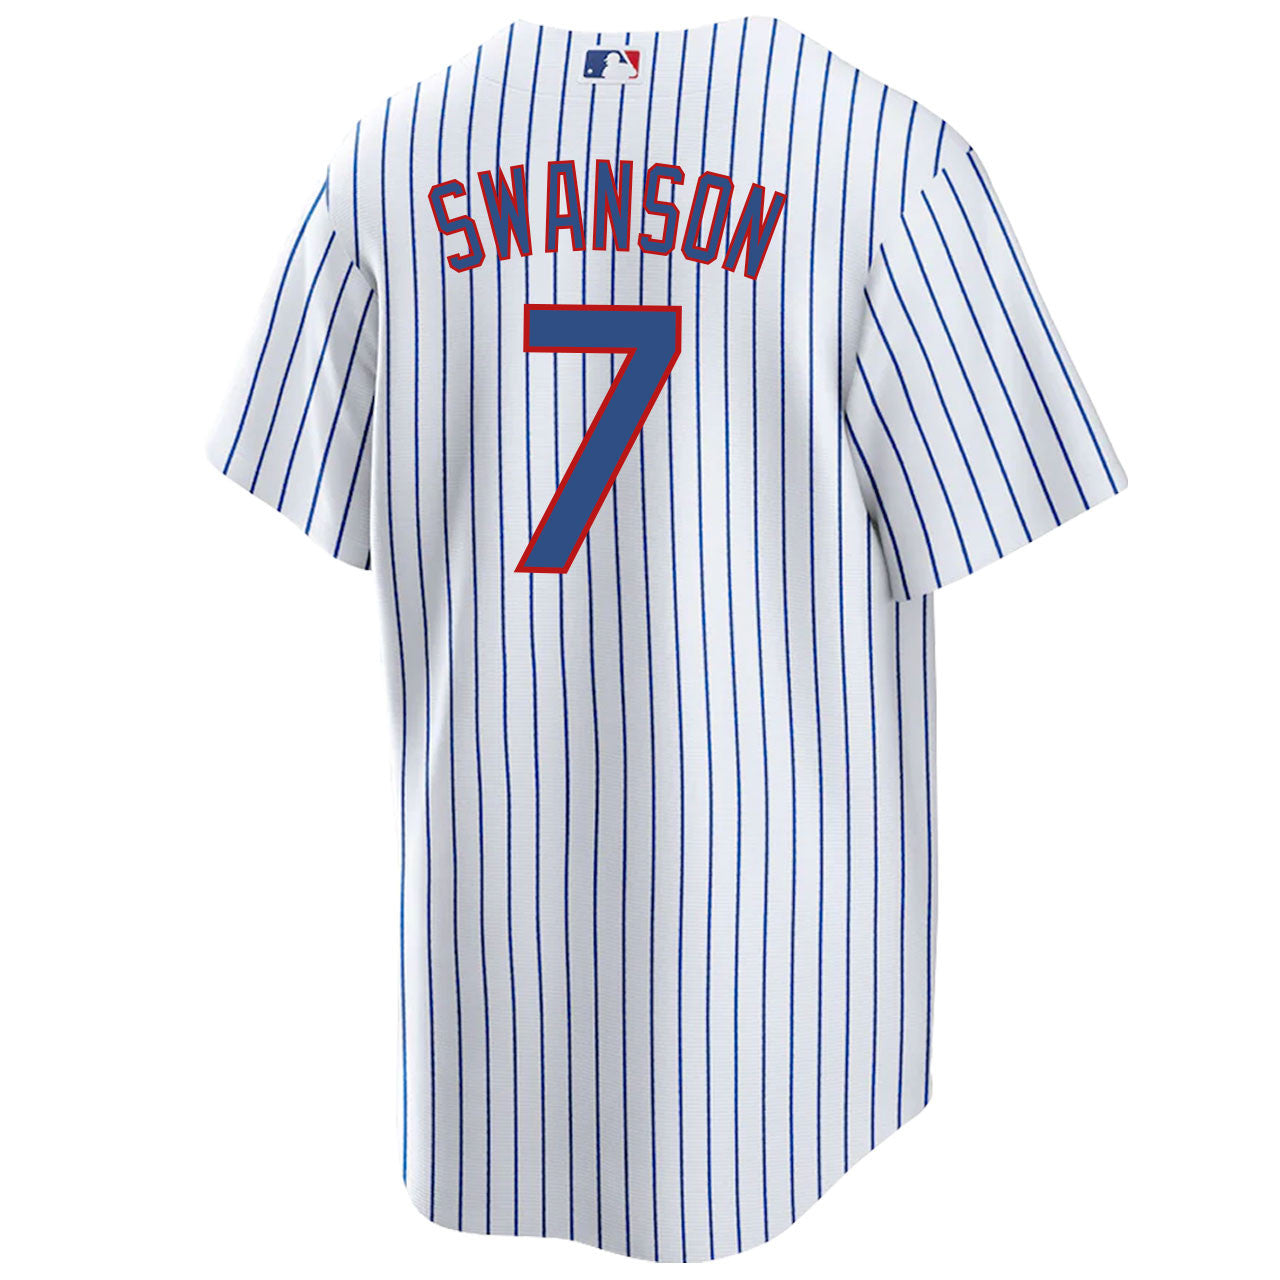 NIKE Youth Dansby Swanson Chicago Cubs White Home Replica Jersey